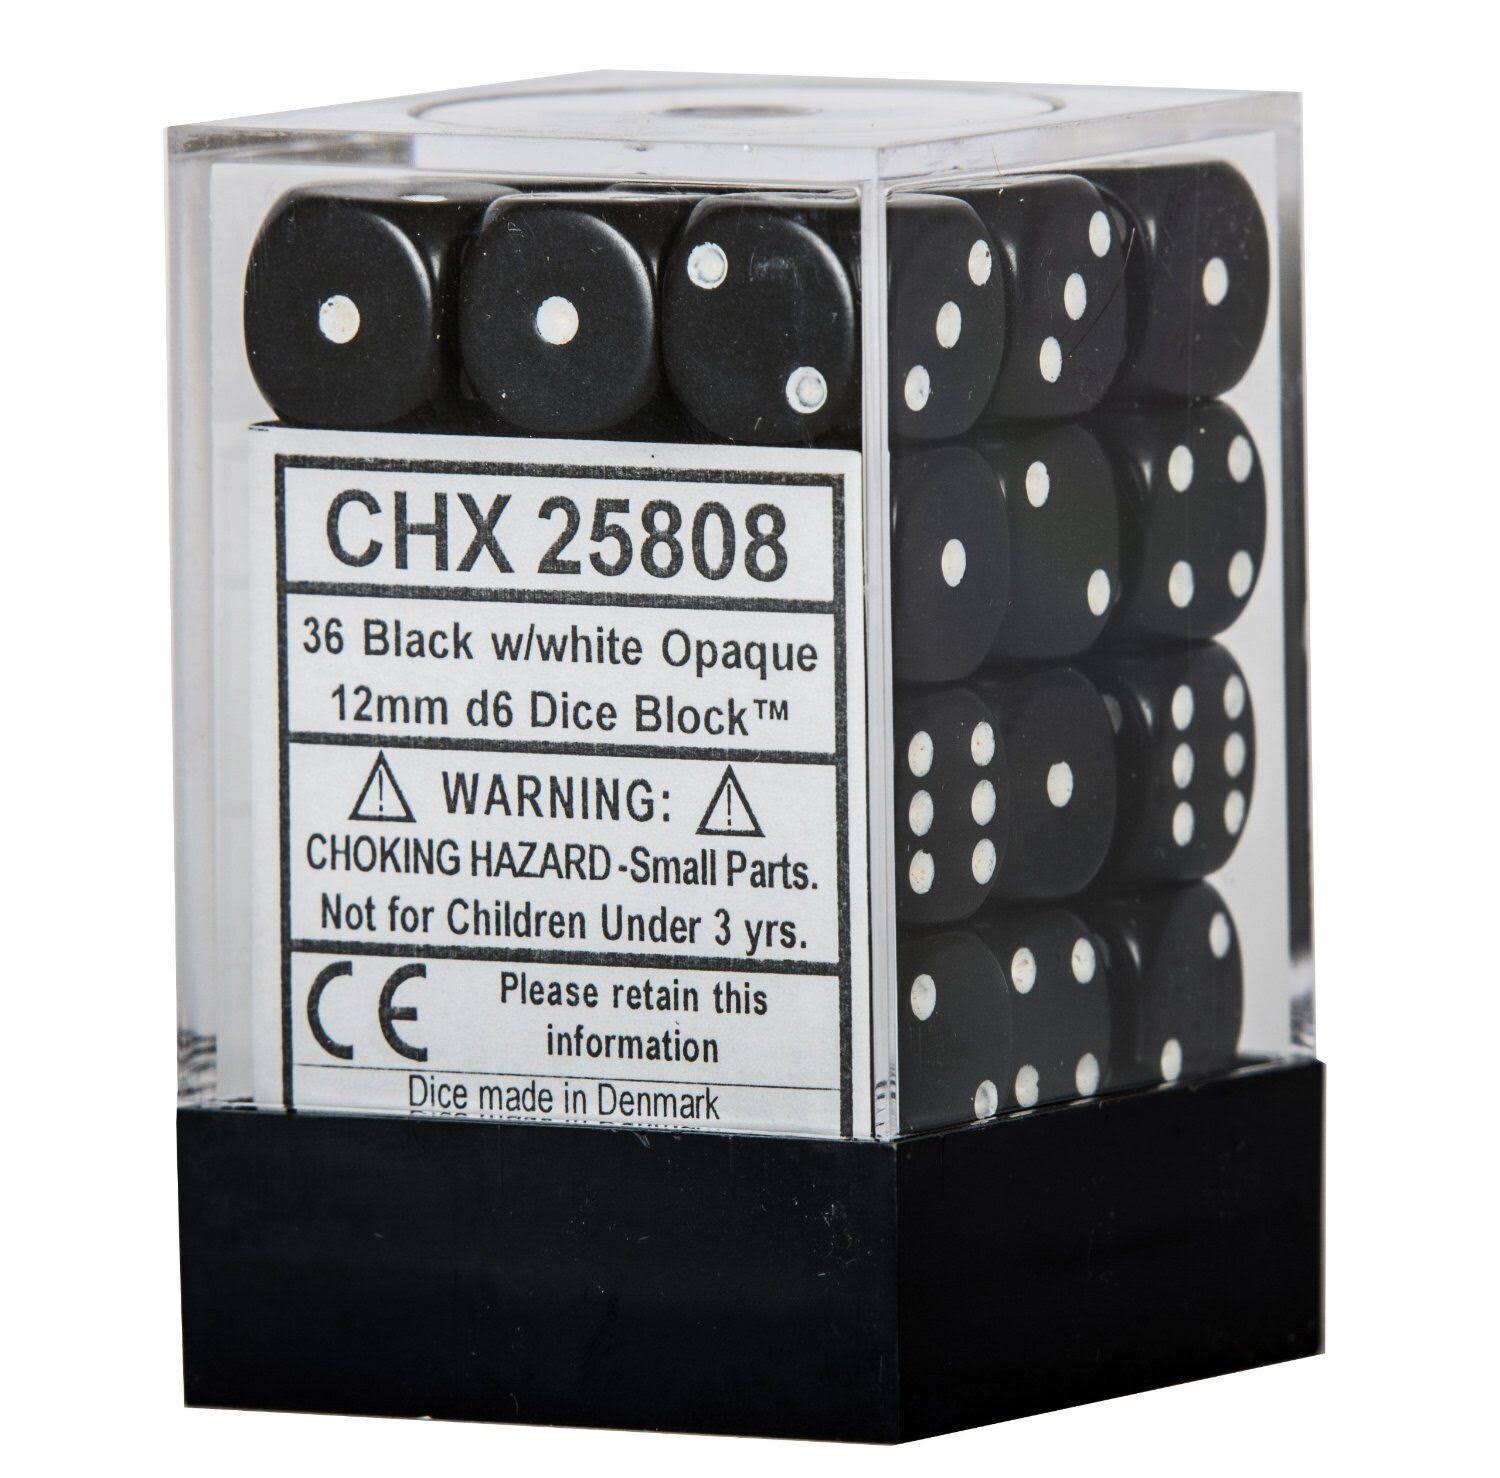 Chessex Black with White Dice Block, 12mm D6, Pack of 36